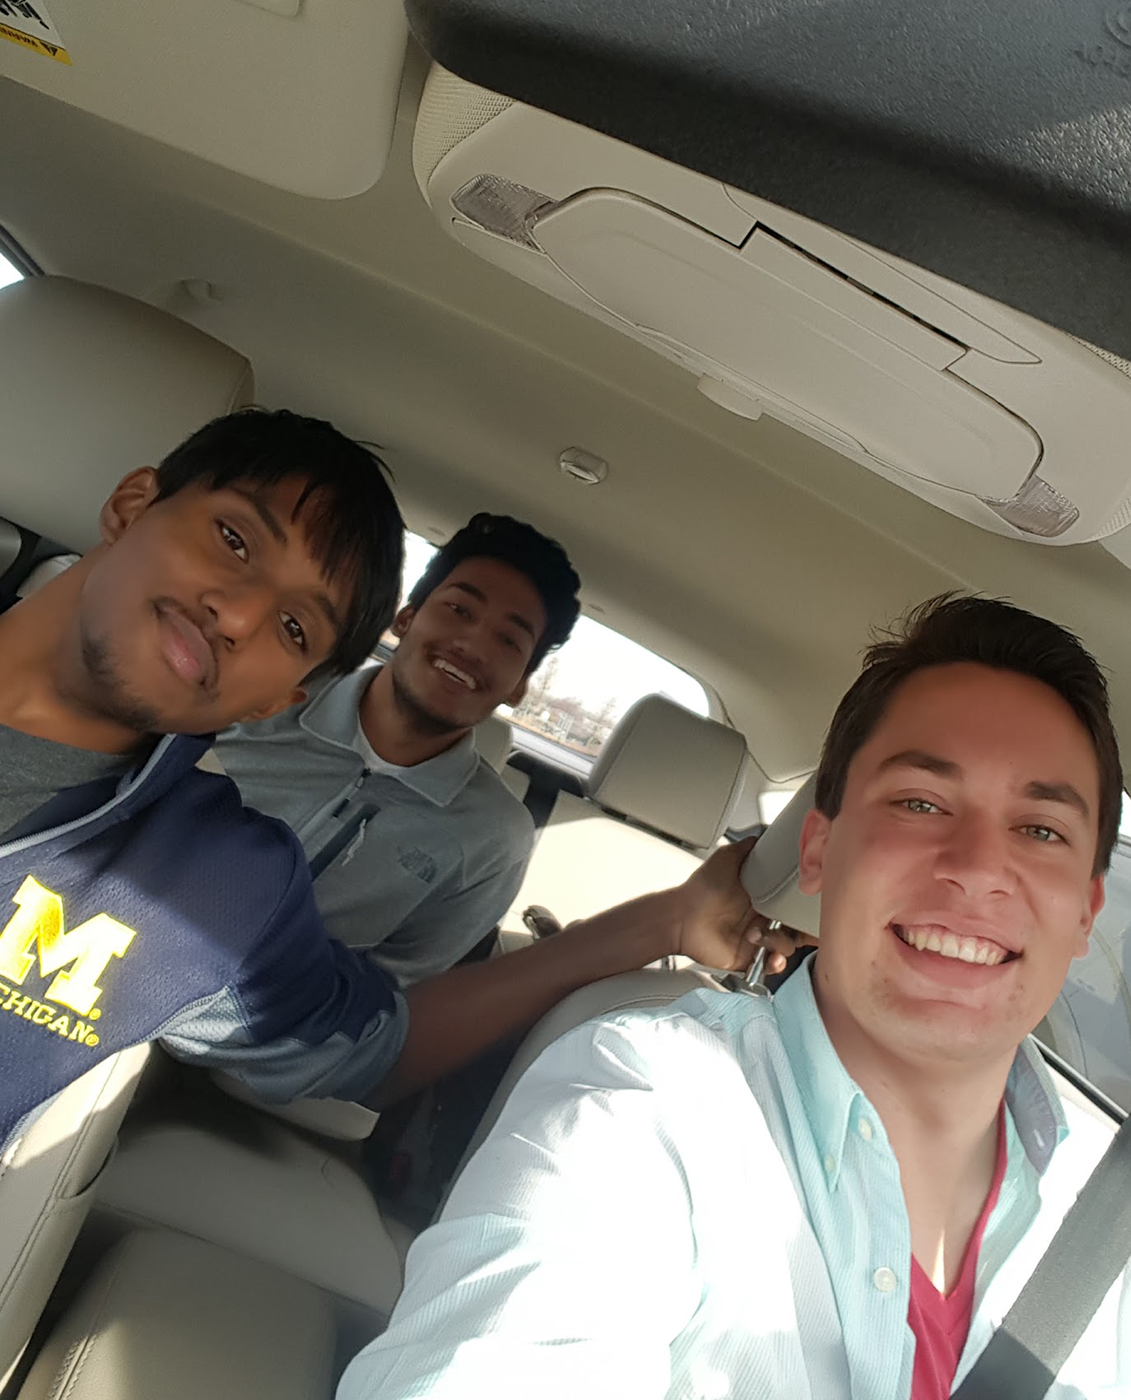 Three male students sitting in a car with a beige interior as part of a car-sharing study